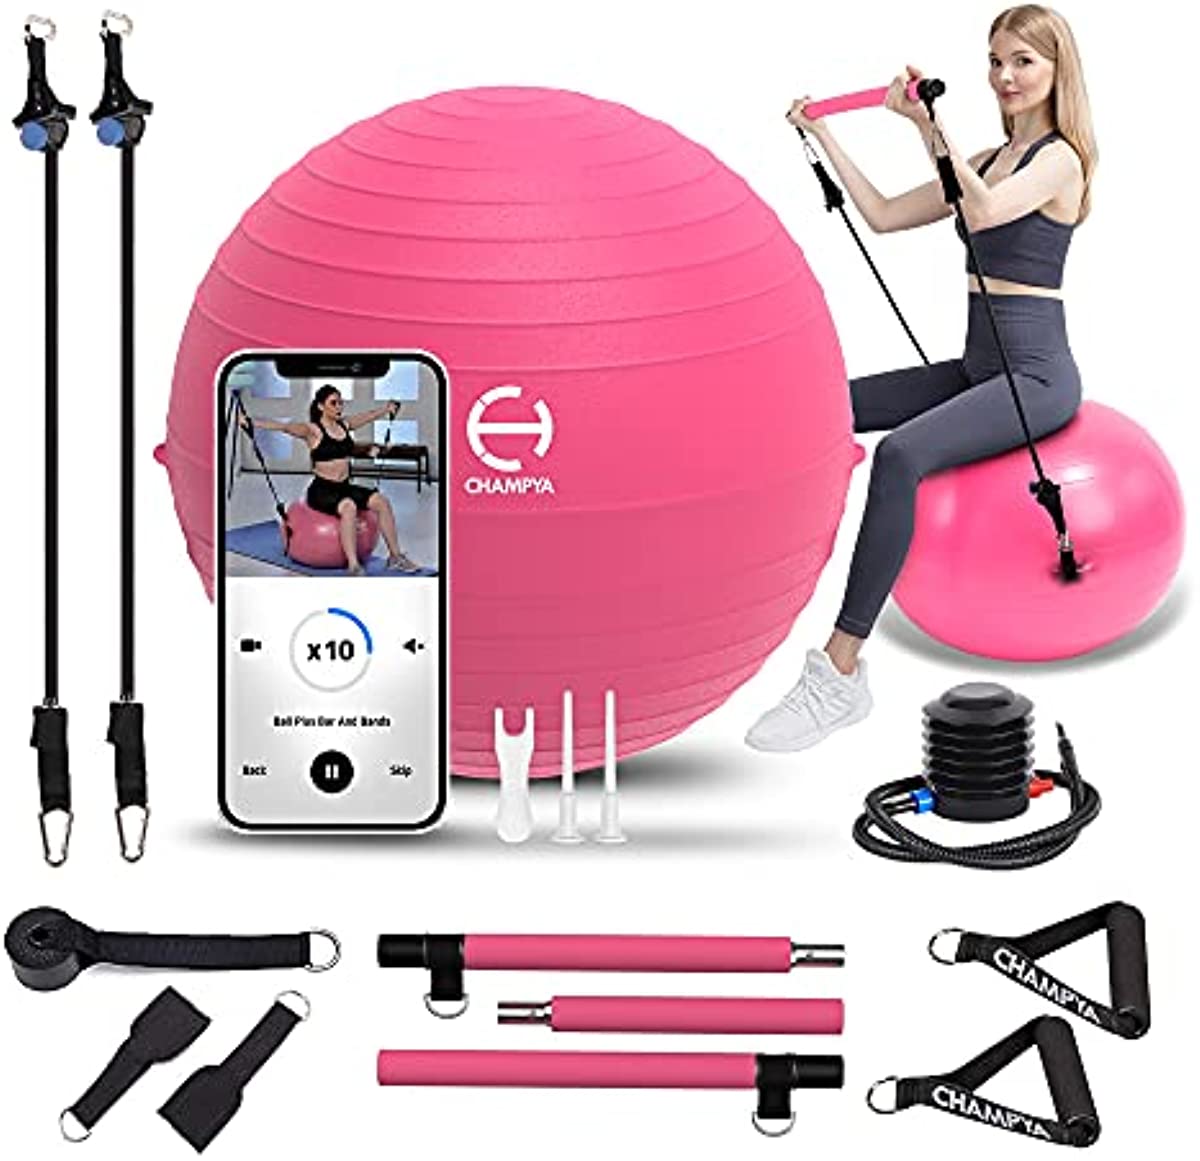 𝗖𝗛𝗔𝗠𝗣𝗬𝗔 𝗘𝘅𝗲𝗿𝗰𝗶𝘀𝗲 𝗕𝗮𝗹𝗹 for Working Out 65 cm - Yoga Ball Chair & Balance Ball for Pregnancy, Birthing Physical Therapy & Chair for Office - Stability Ball & Stainless Steel Pilates Bar for Workout